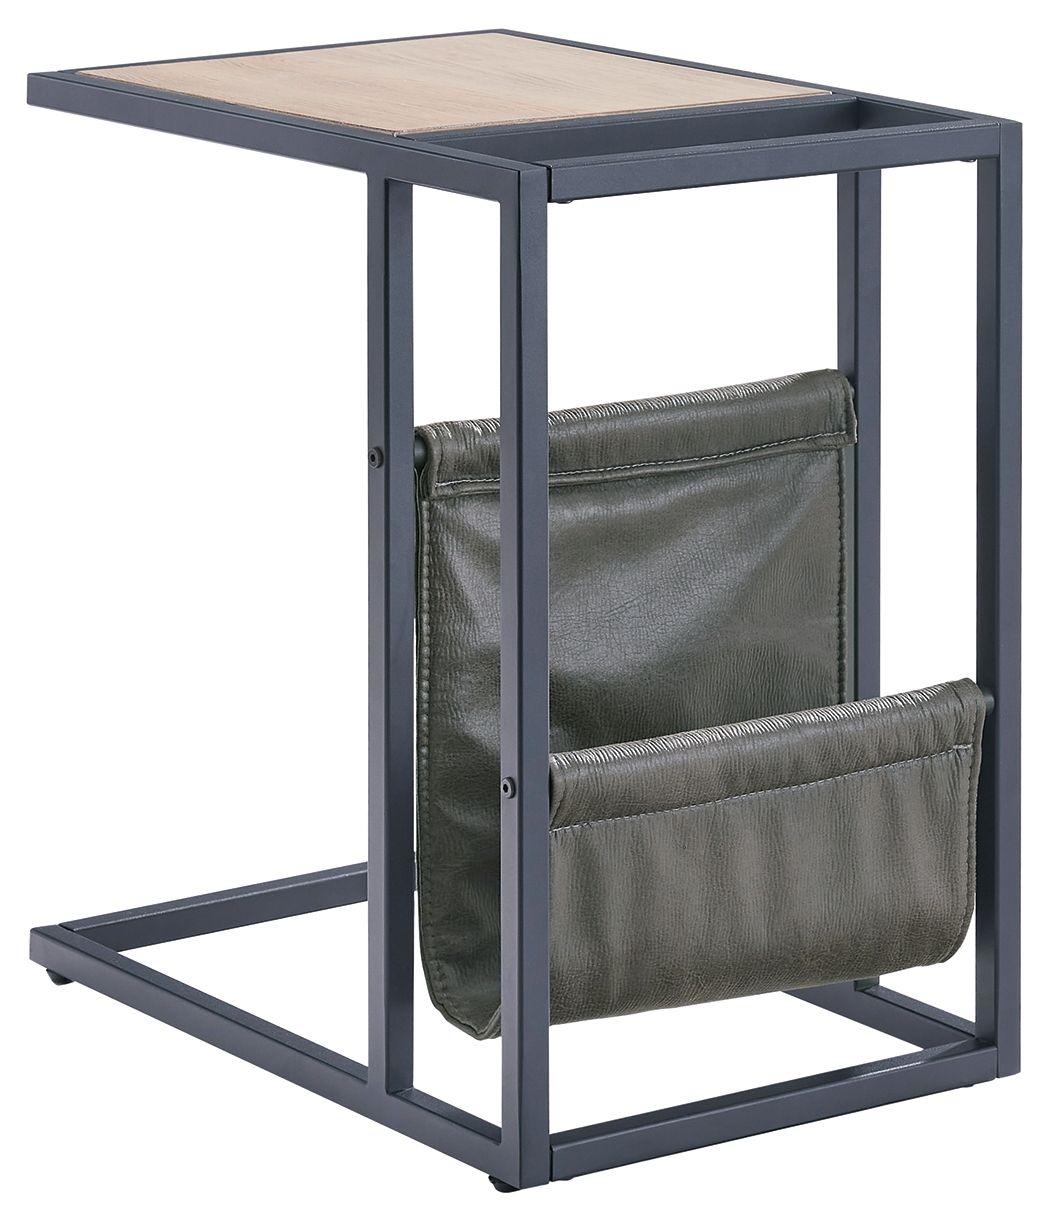 Freslowe - Light Brown / Black - Chair Side End Table With Magazine Basket Tony's Home Furnishings Furniture. Beds. Dressers. Sofas.